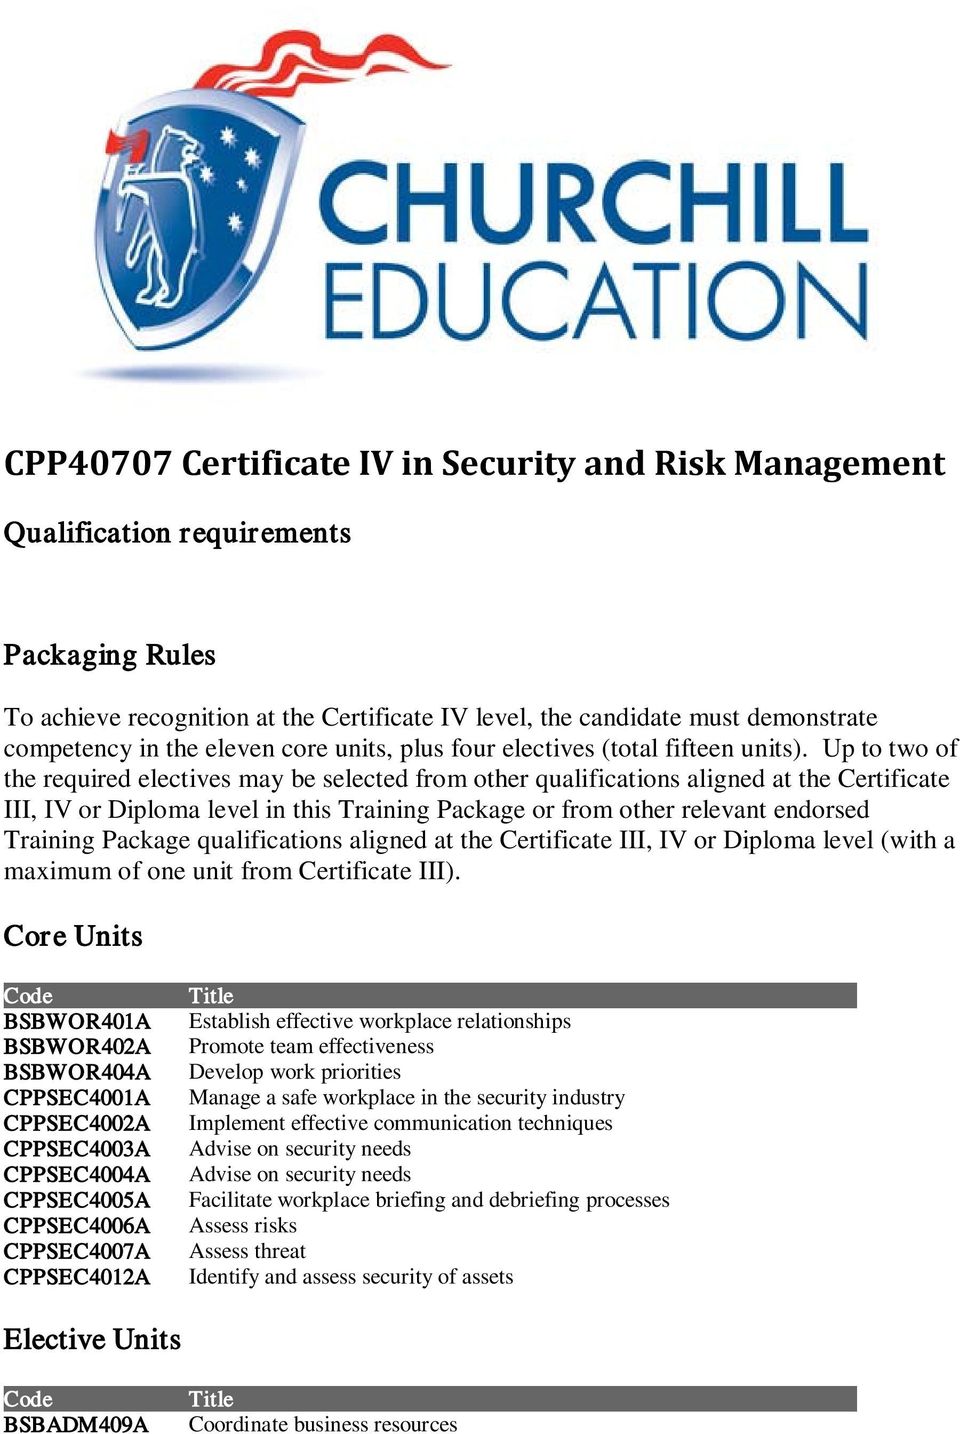 Up to two of the required electives may be selected from other qualifications aligned at the Certificate III, IV or Diploma level in this Training Package or from other relevant endorsed Training